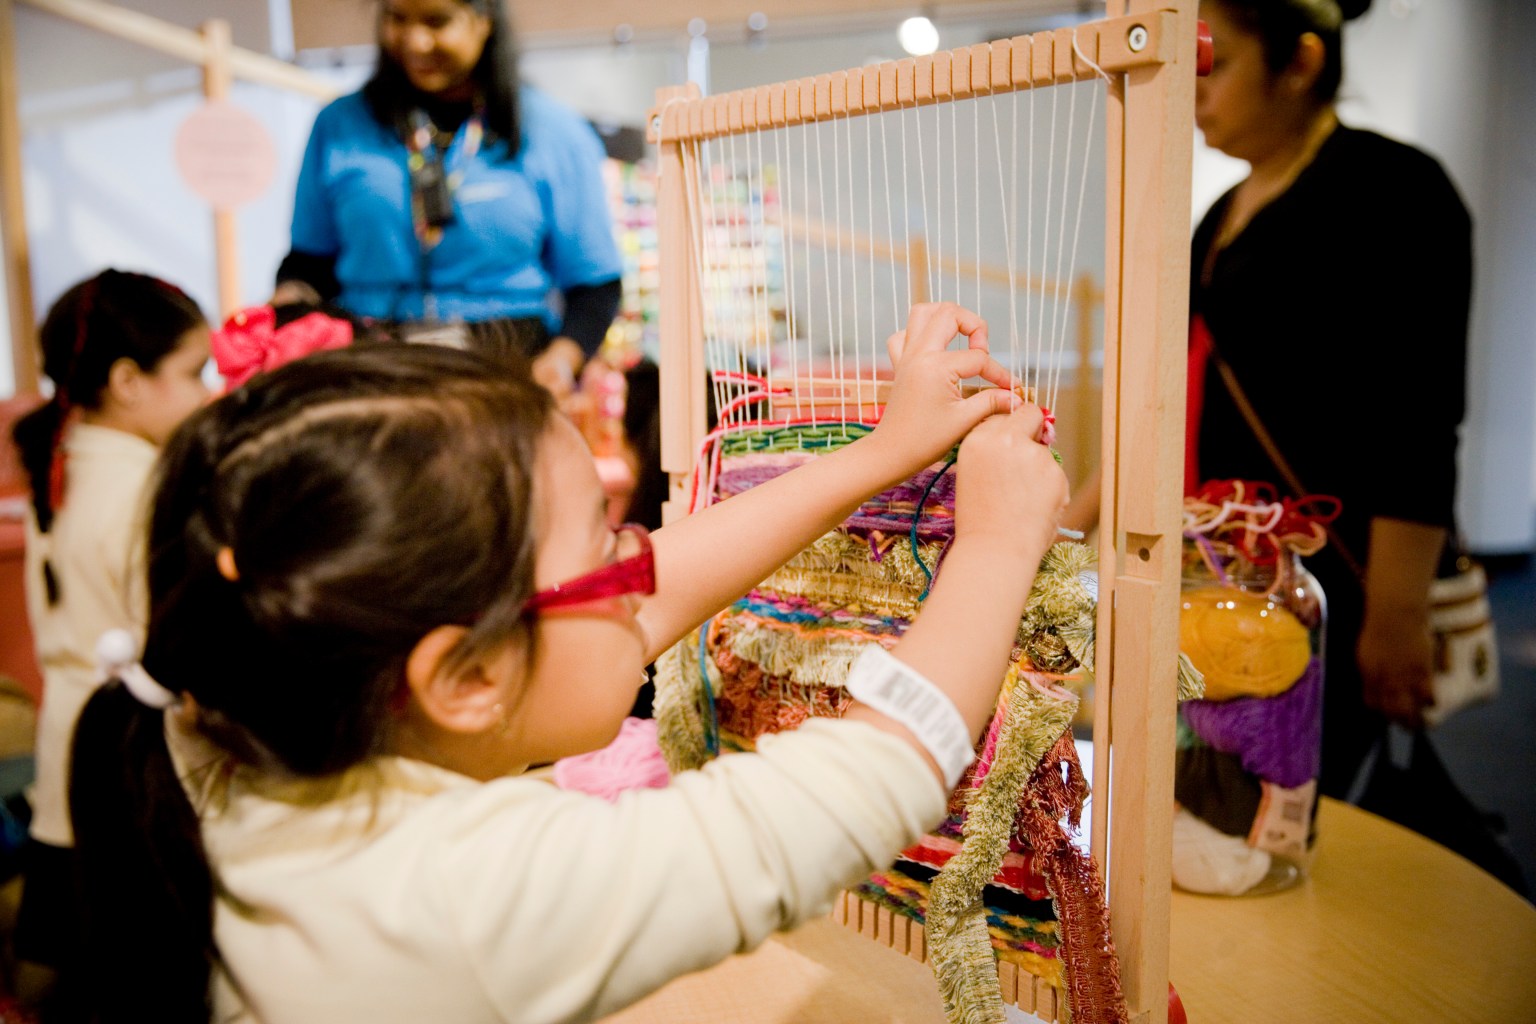 A young child experiments with weaving in a museum space.